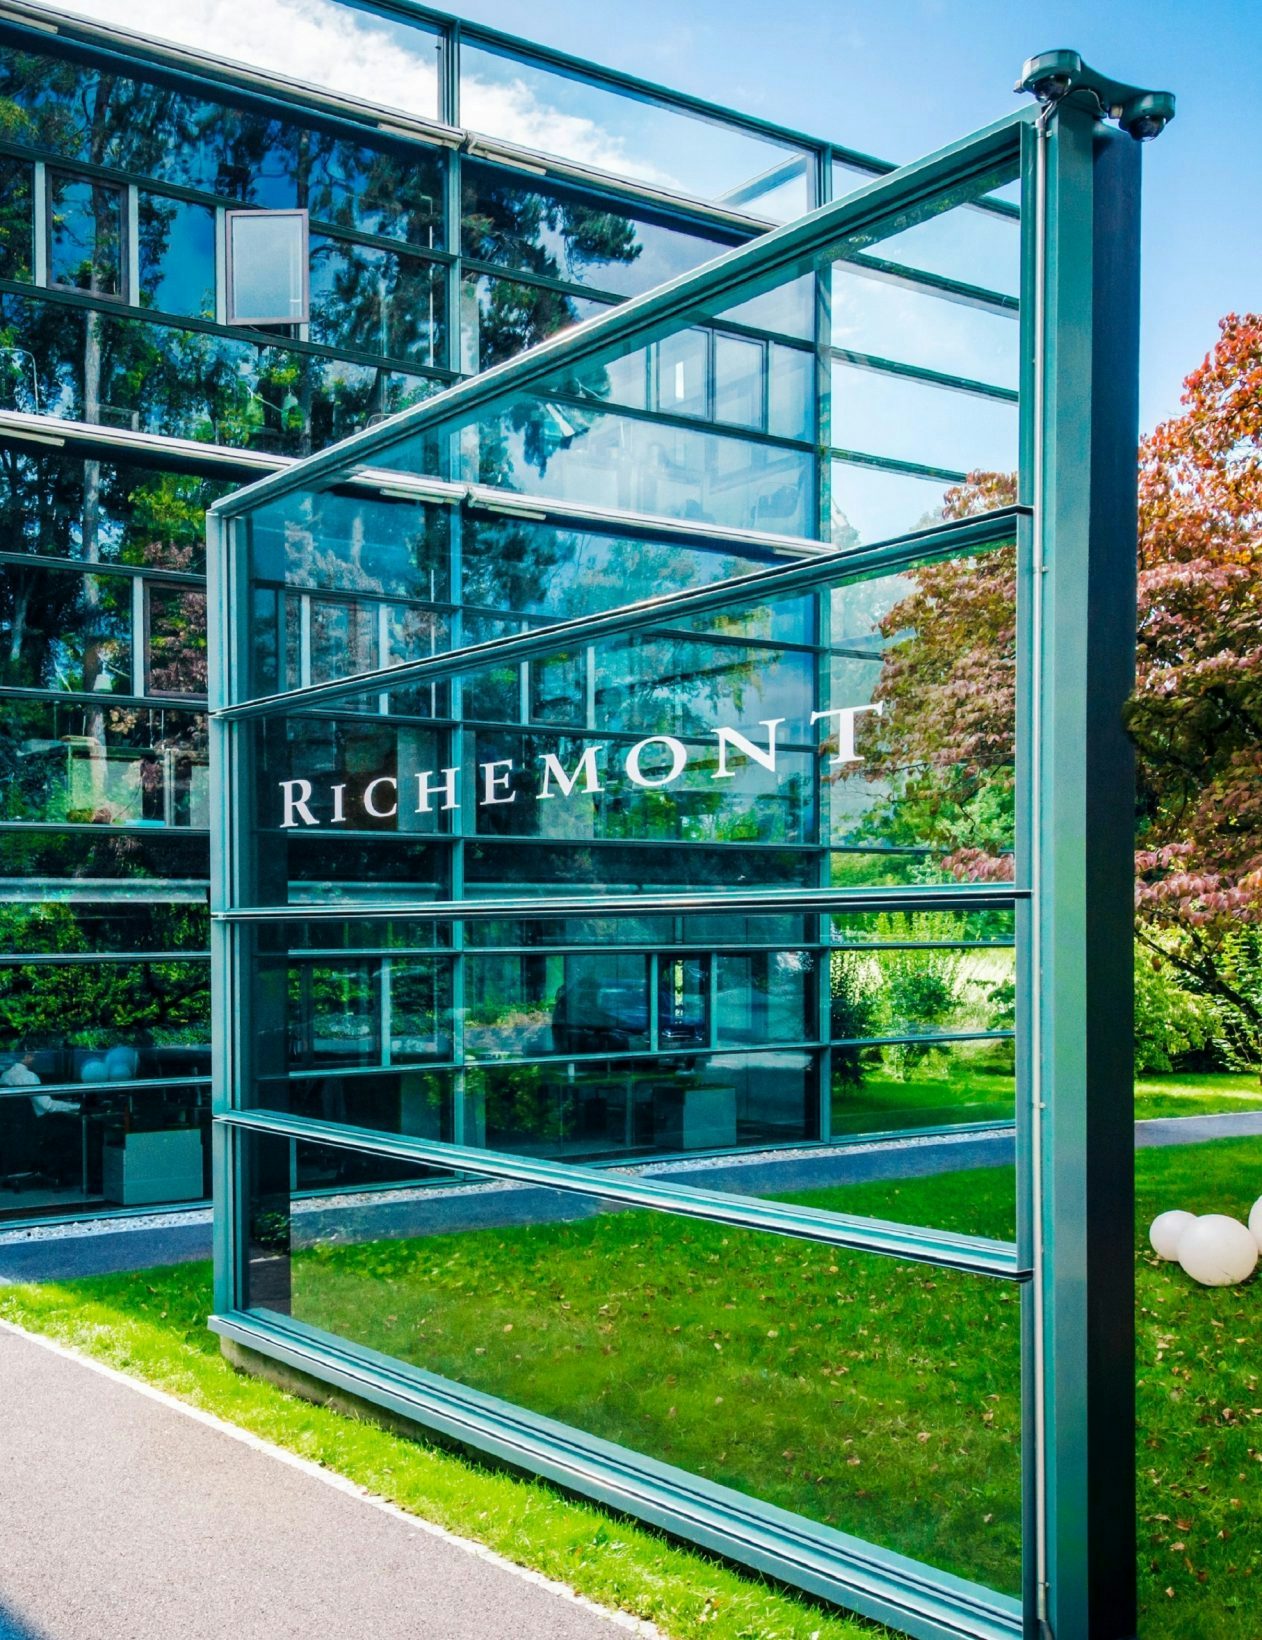 Richemont up by 5% despite lower sales in China